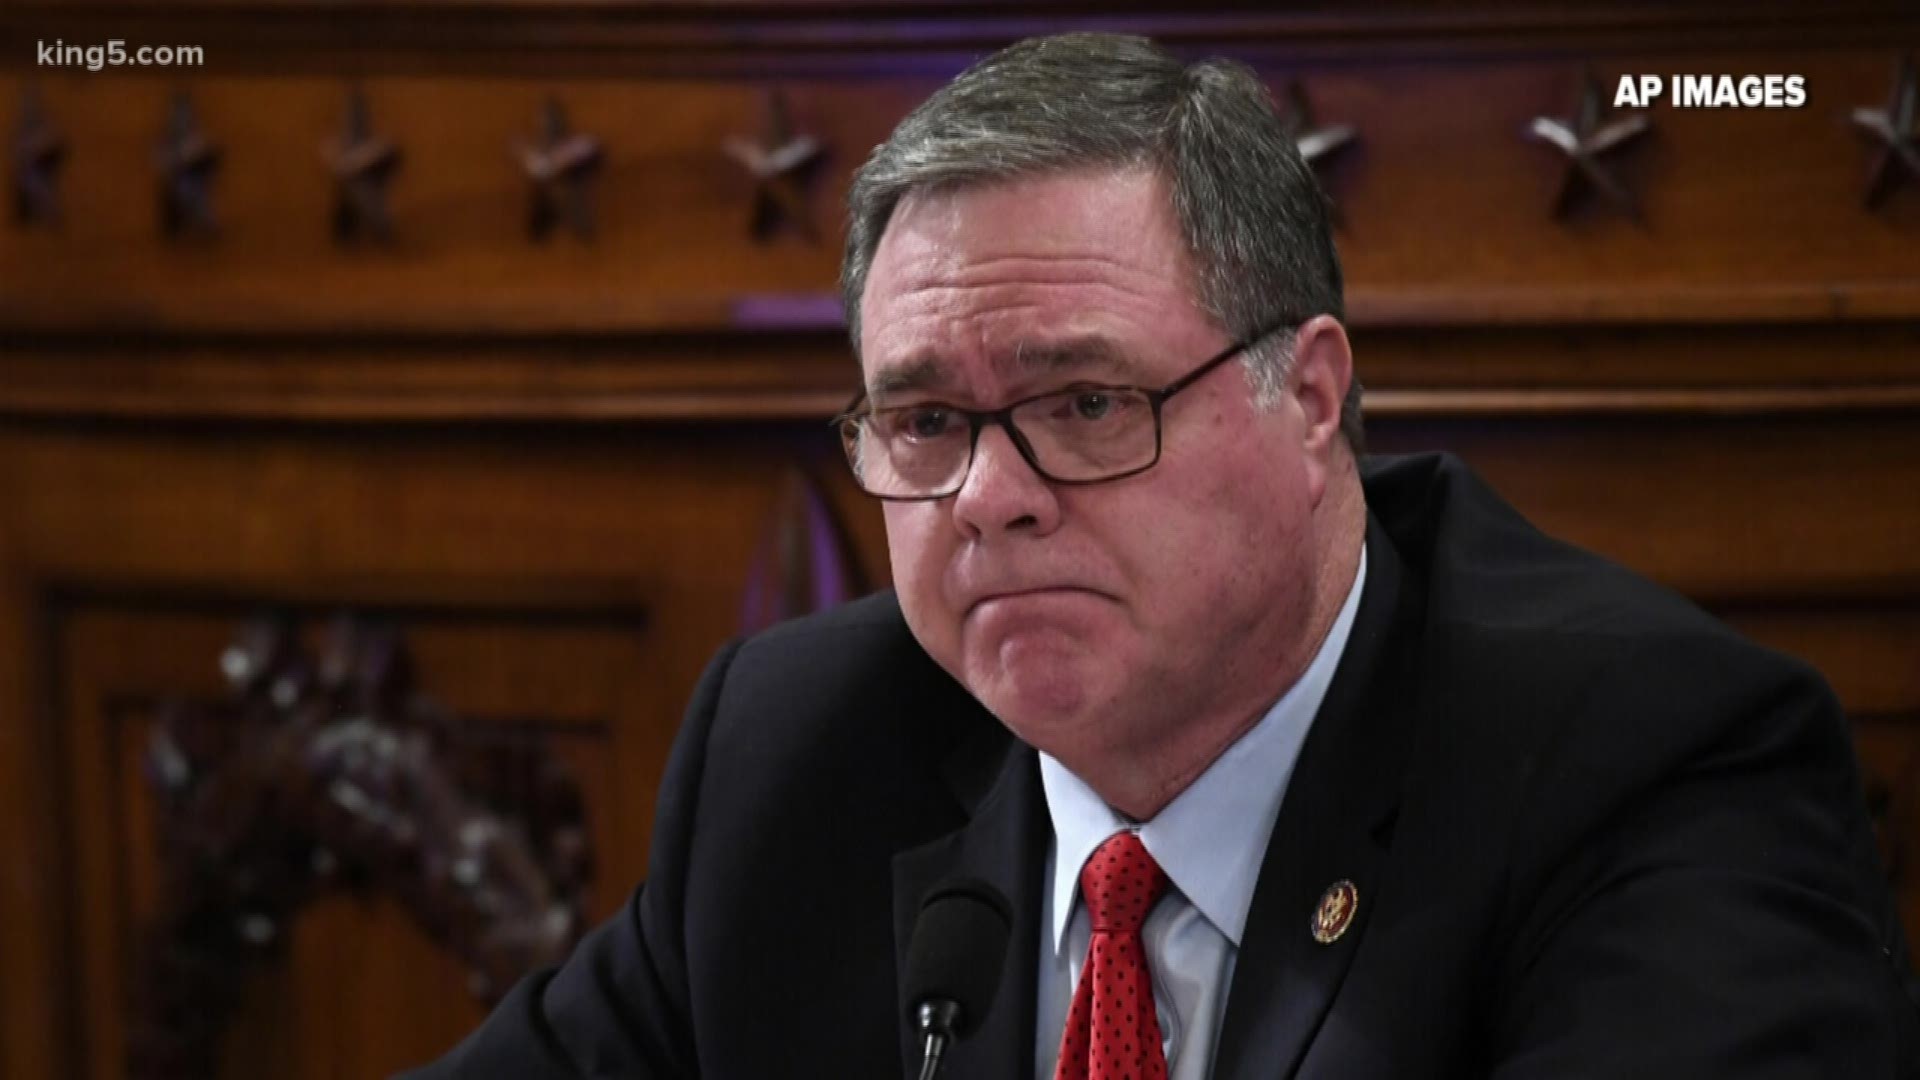 Rep. Denny Heck said he will retire after more than 40 years of public service at the state and federal level.